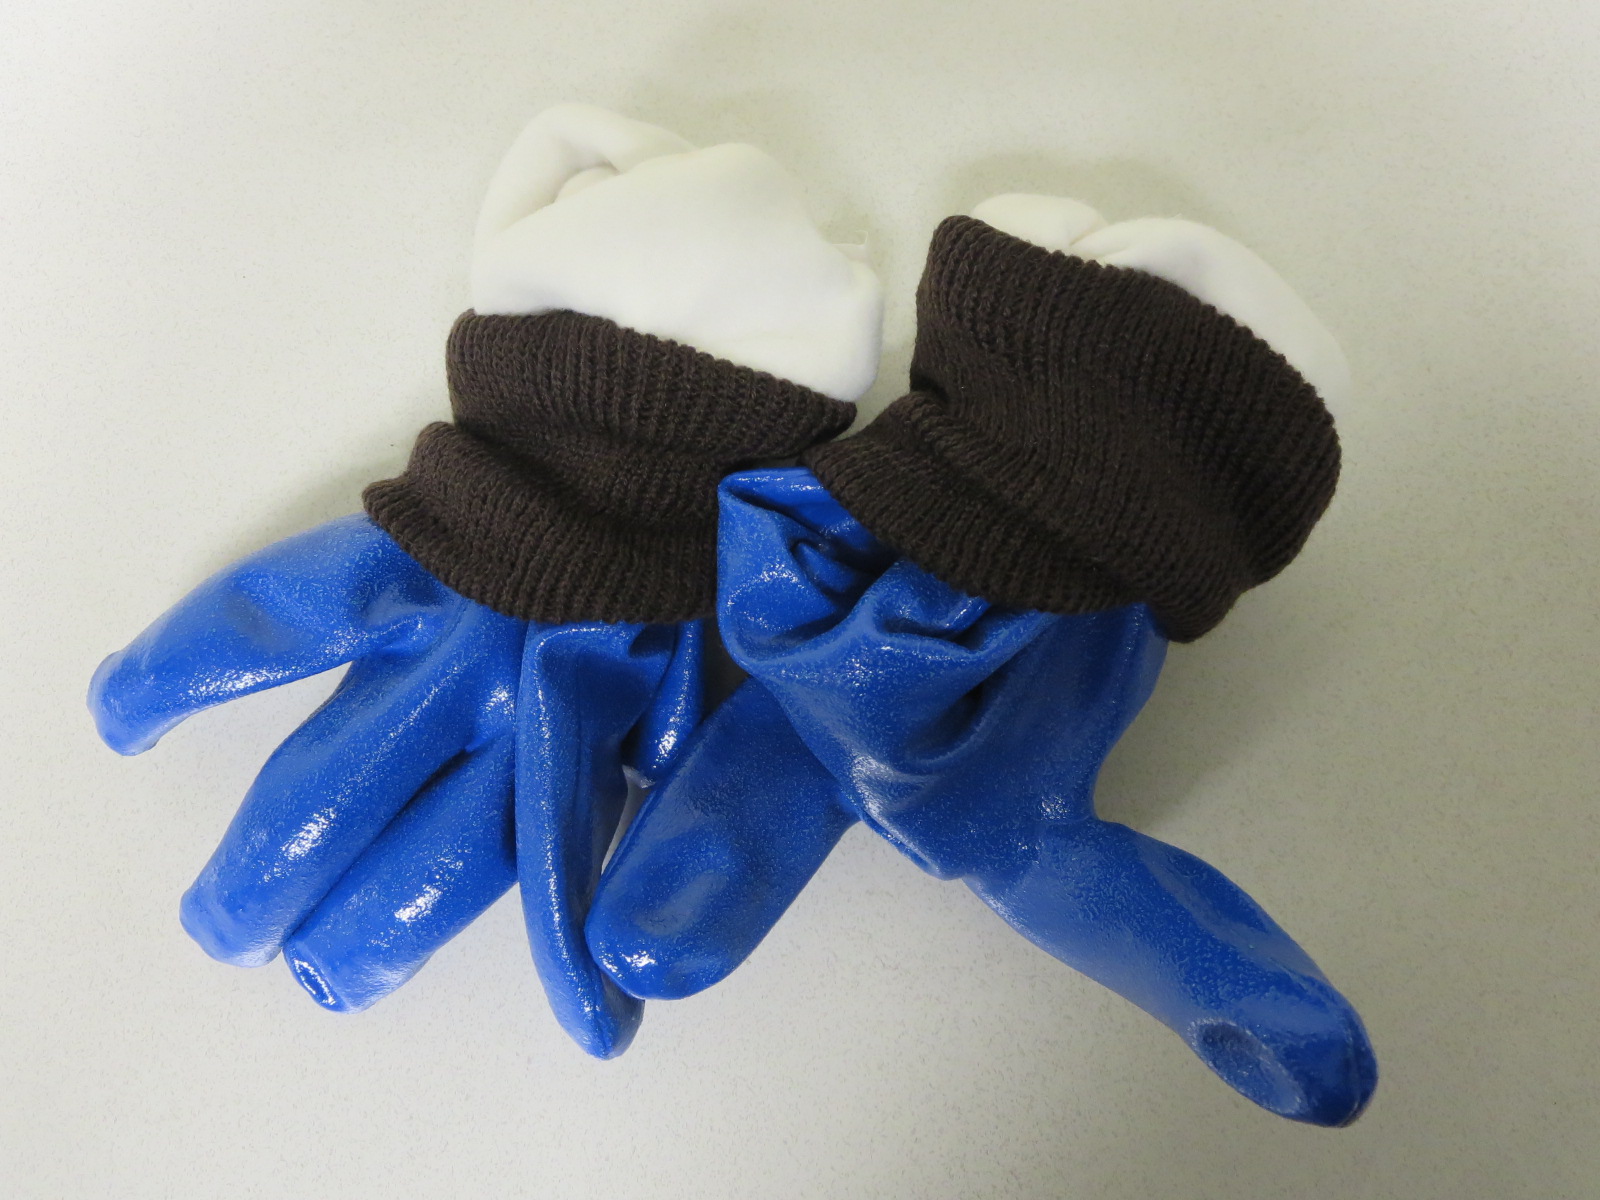 North Sea™ Nitrile Coated Fleece Lined Winter Work Gloves w/ Knit